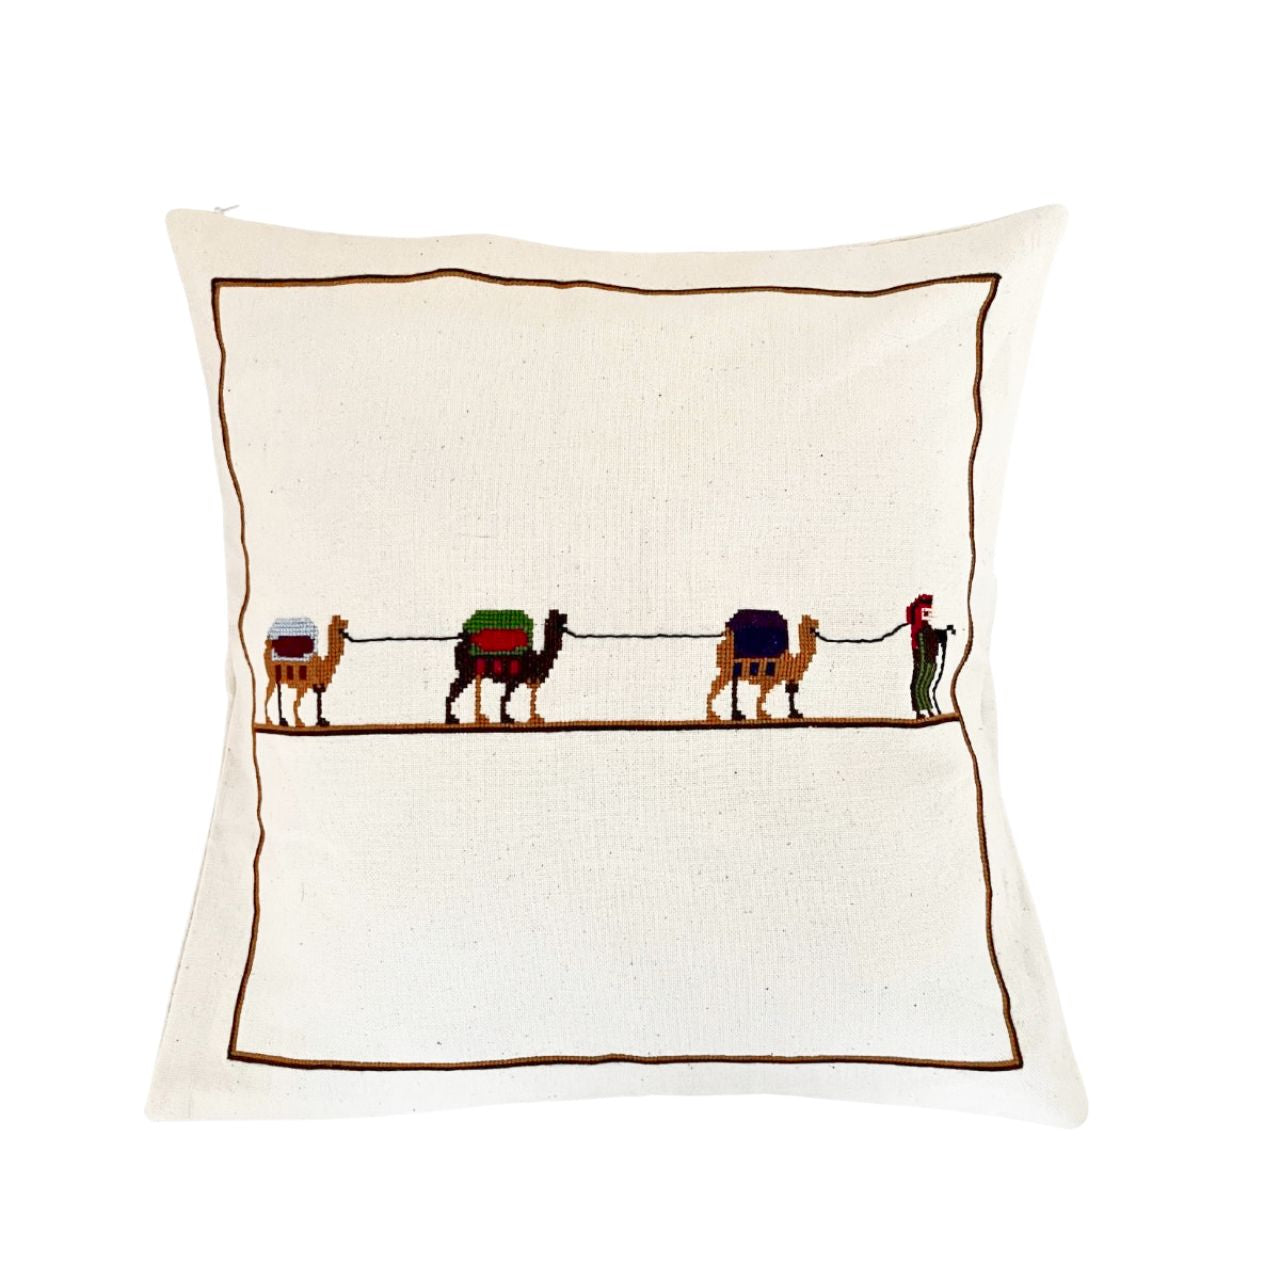 Embroidered Pillow Cover from Hebron--Desert Caravan